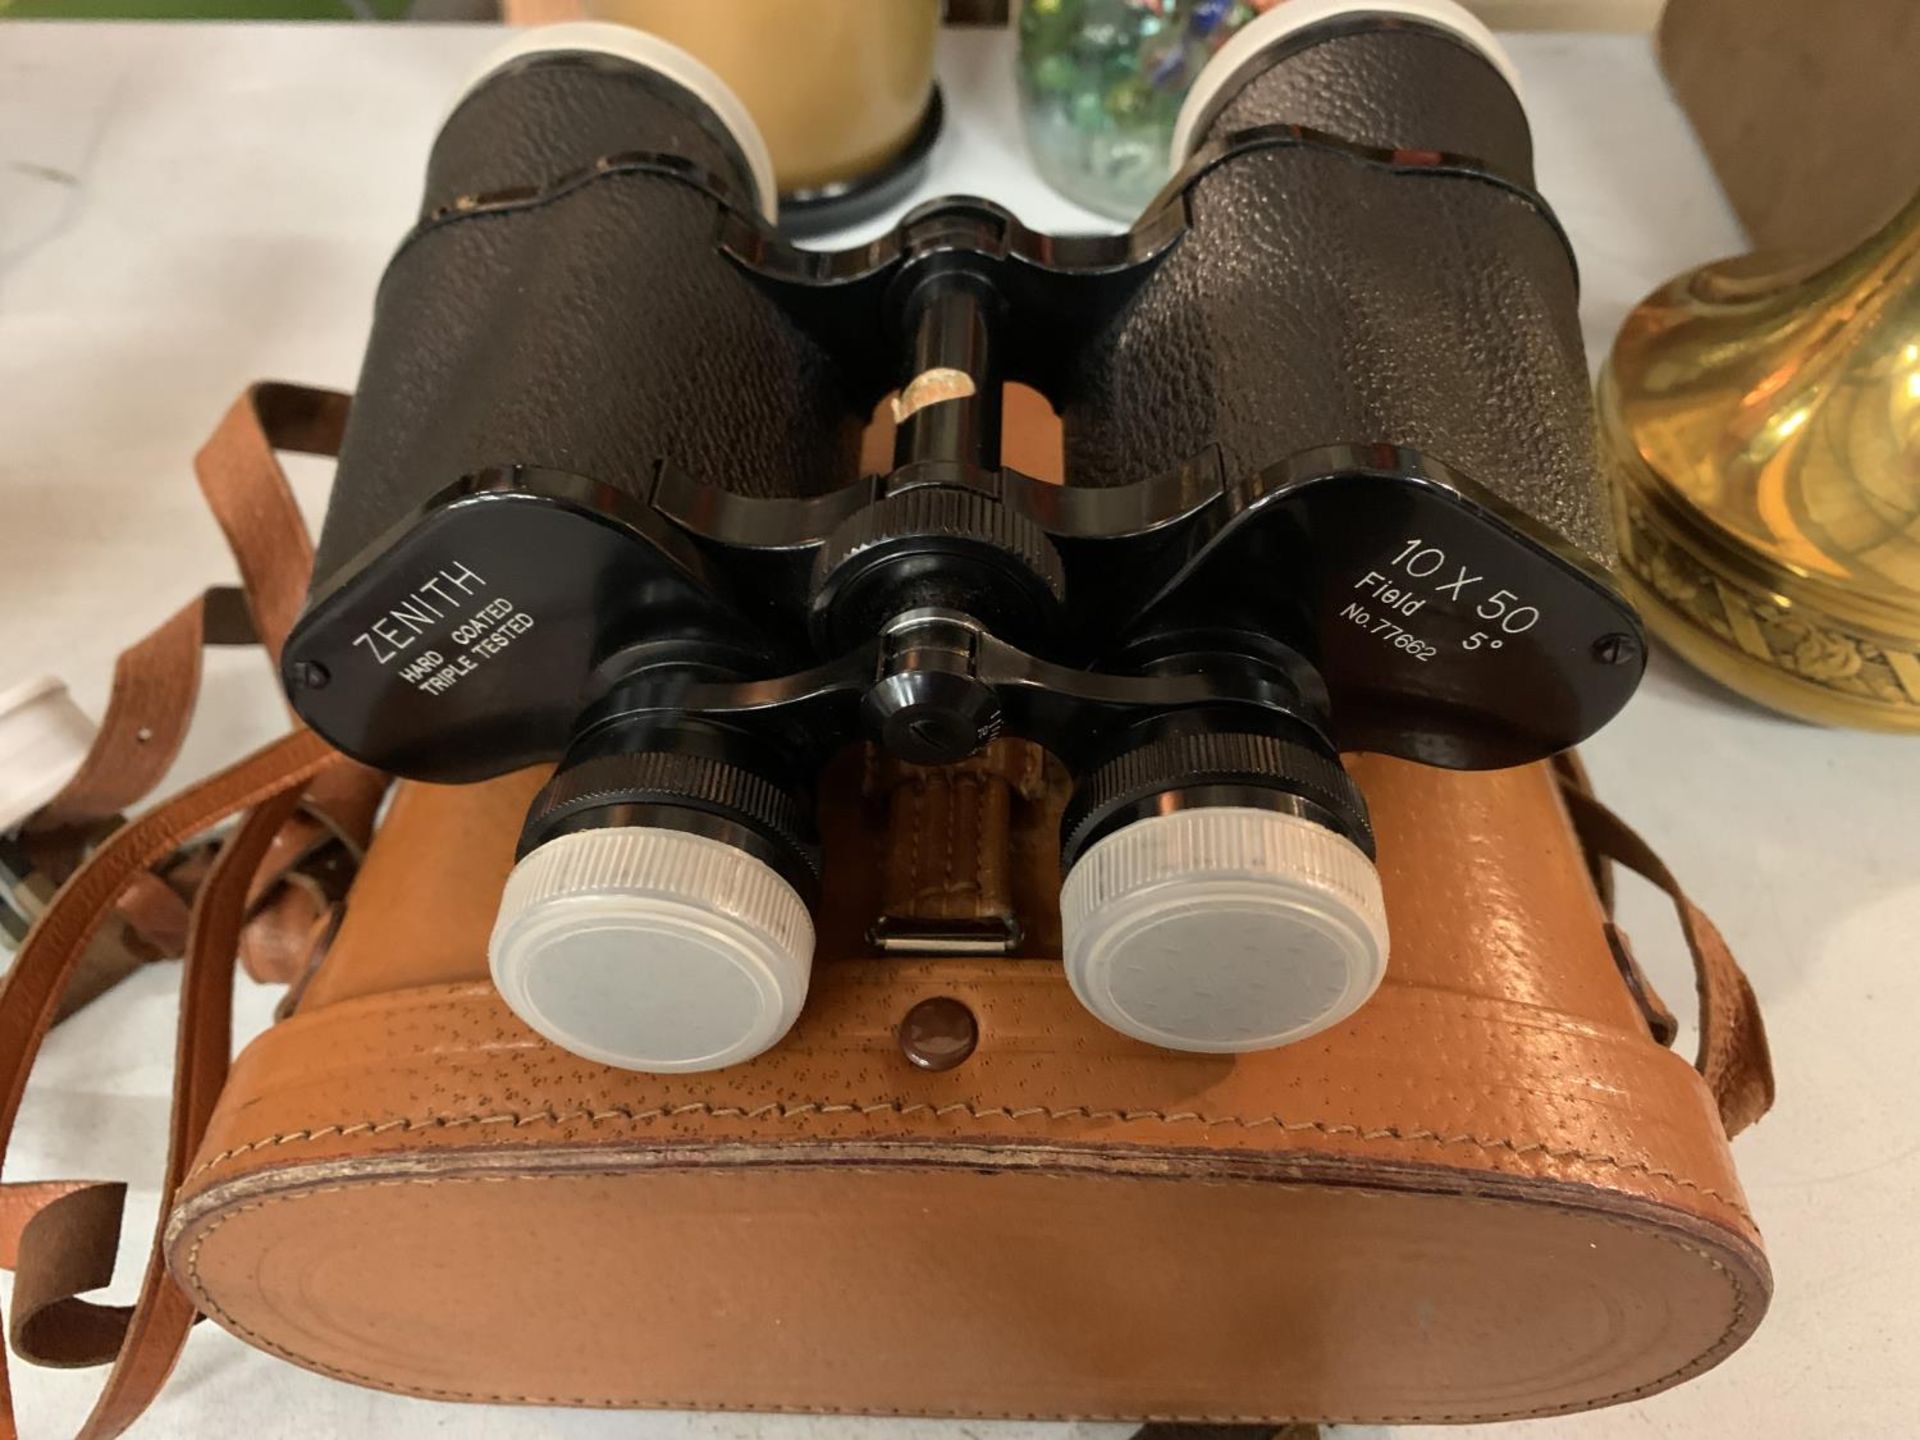 TWO PAIRS OF BINOCULARS WITH CASES - Image 3 of 3